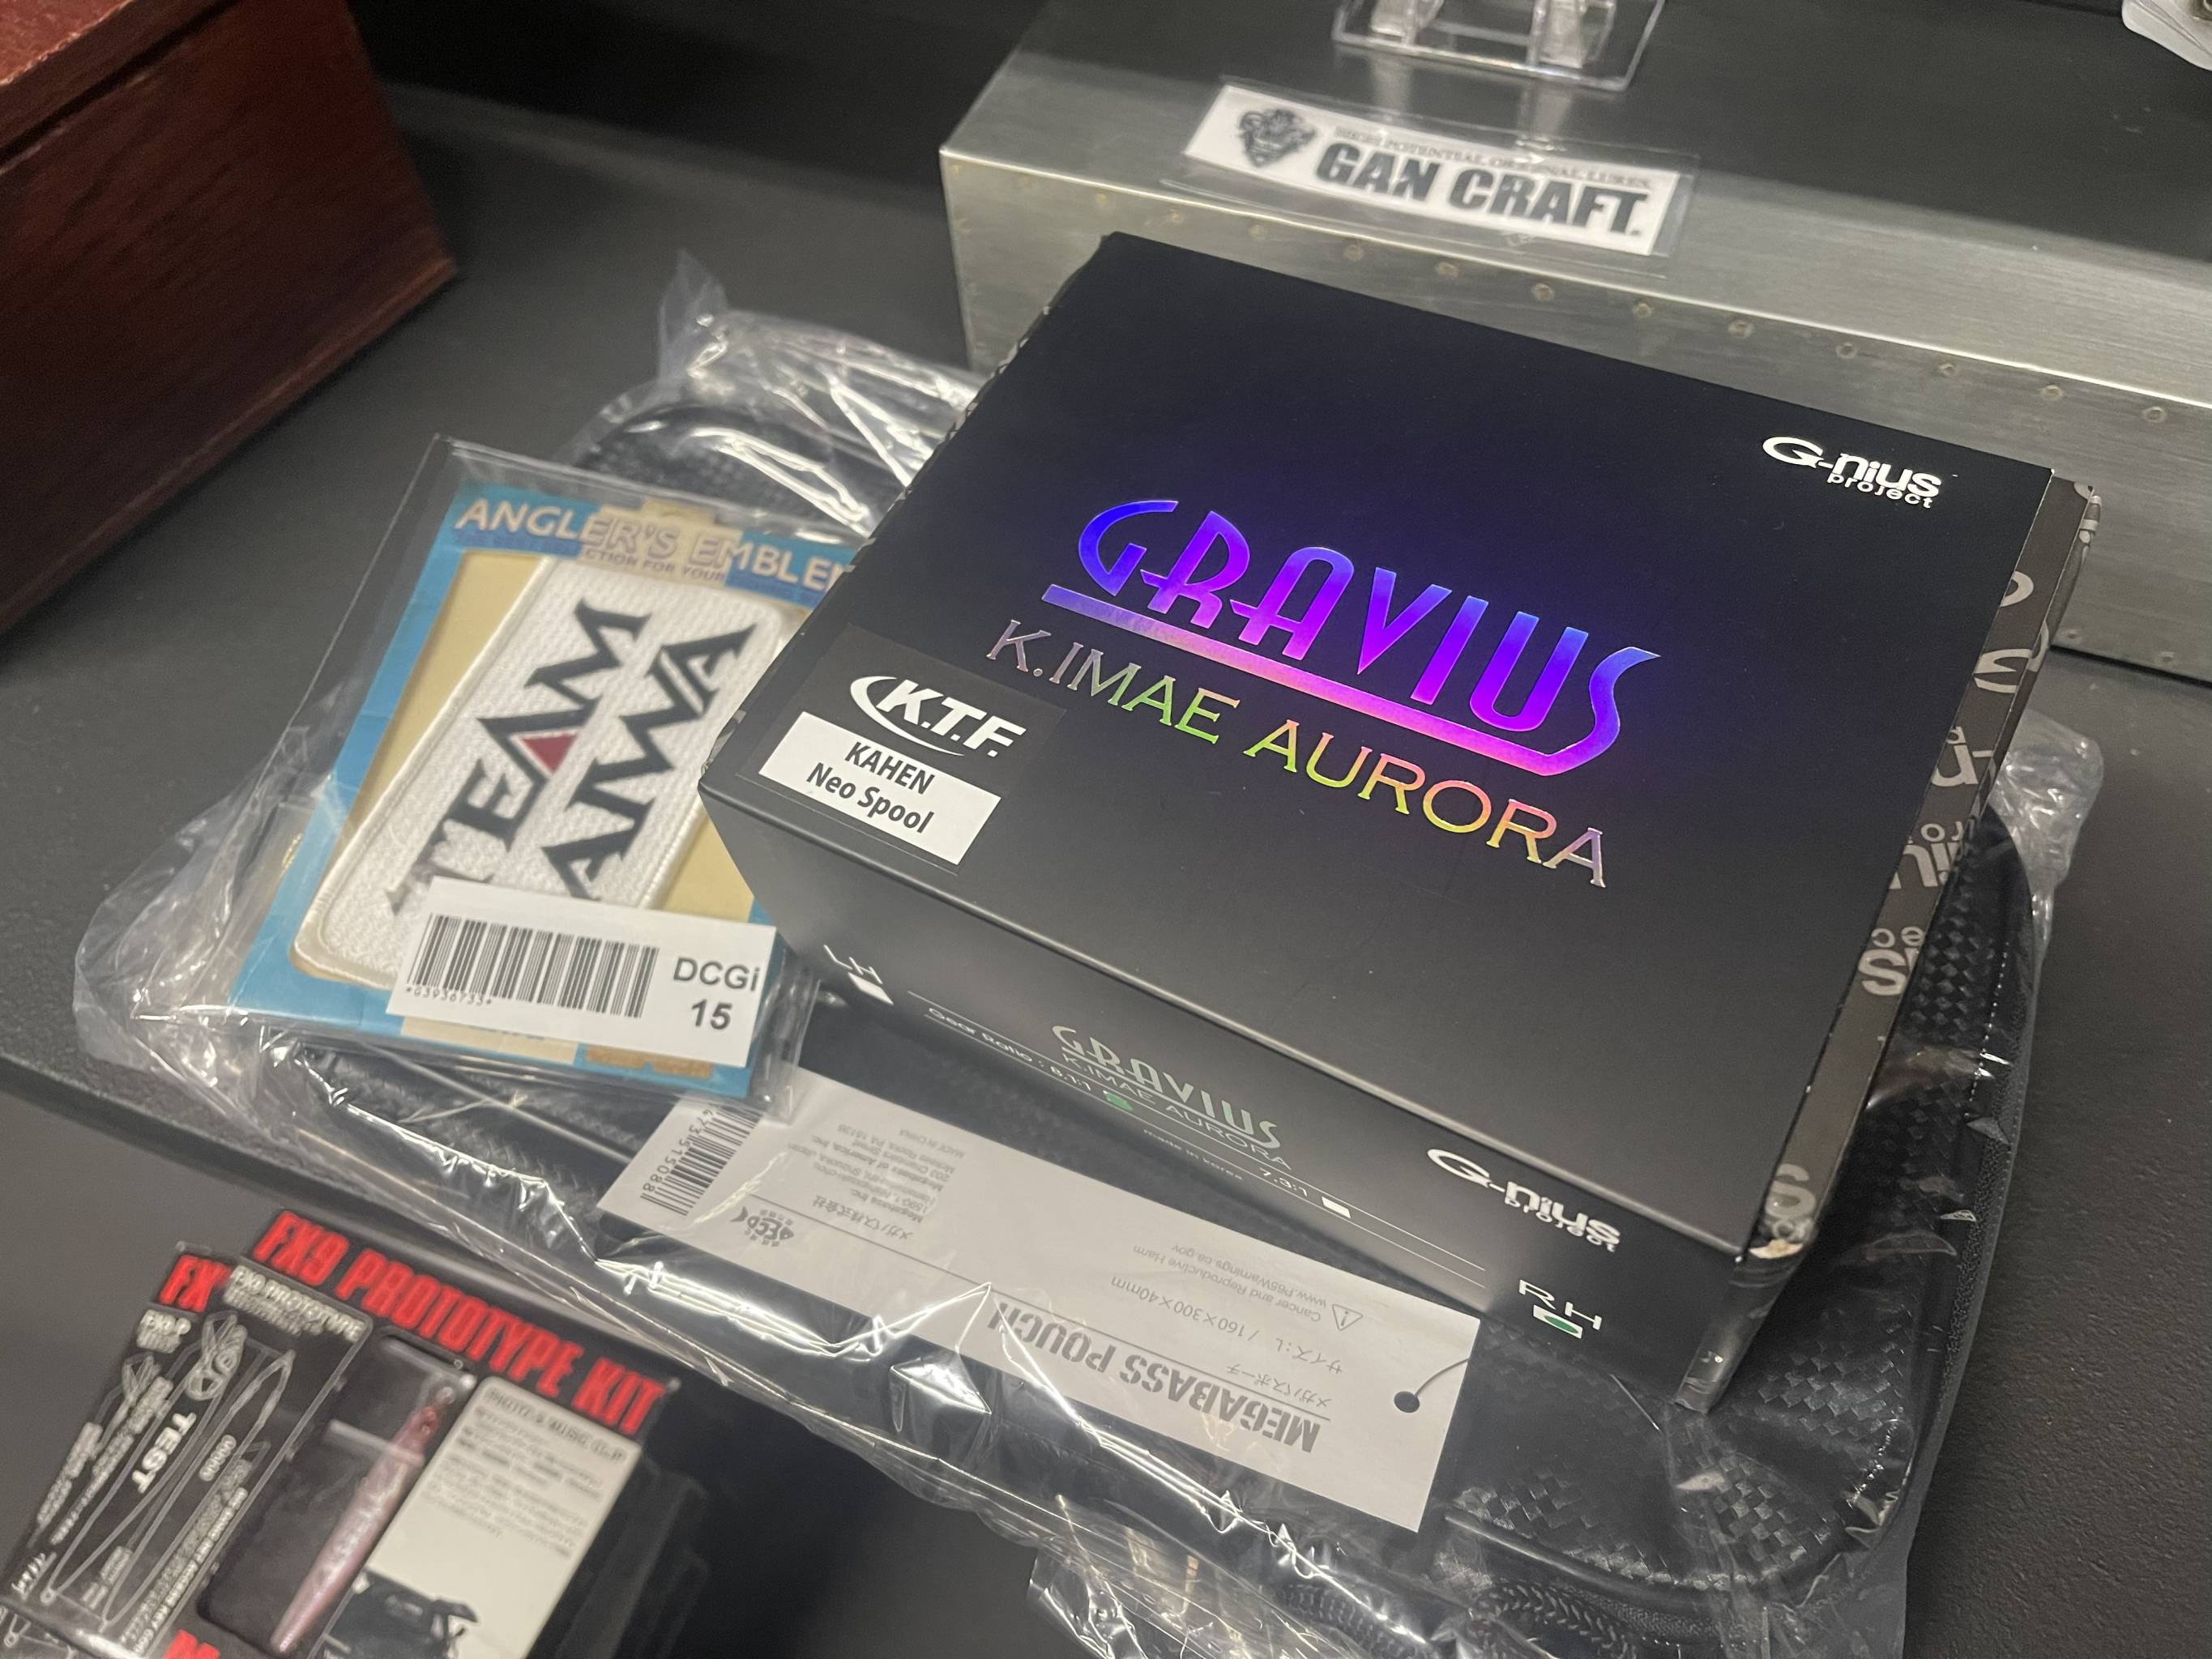 G-nius Project Gravius / K.Imae KTF Aurora – All other JDM and 